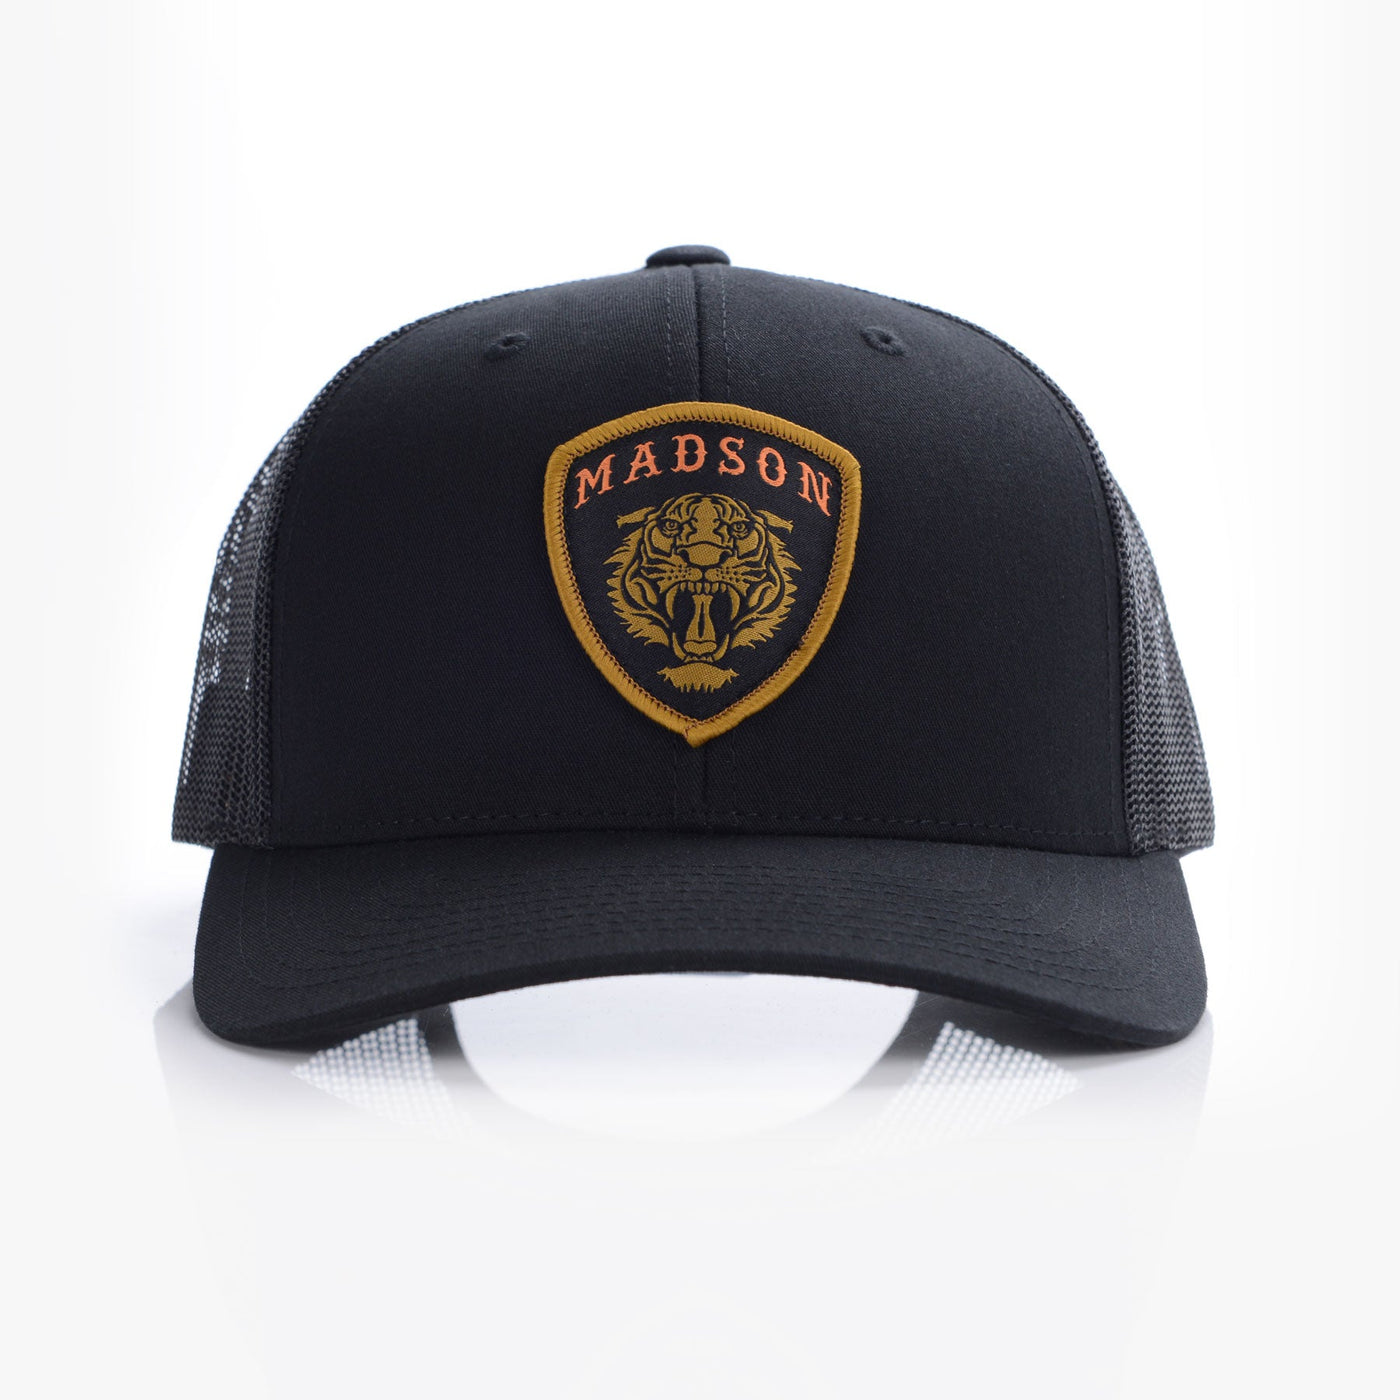 Tiger Shield / Rounded Trucker